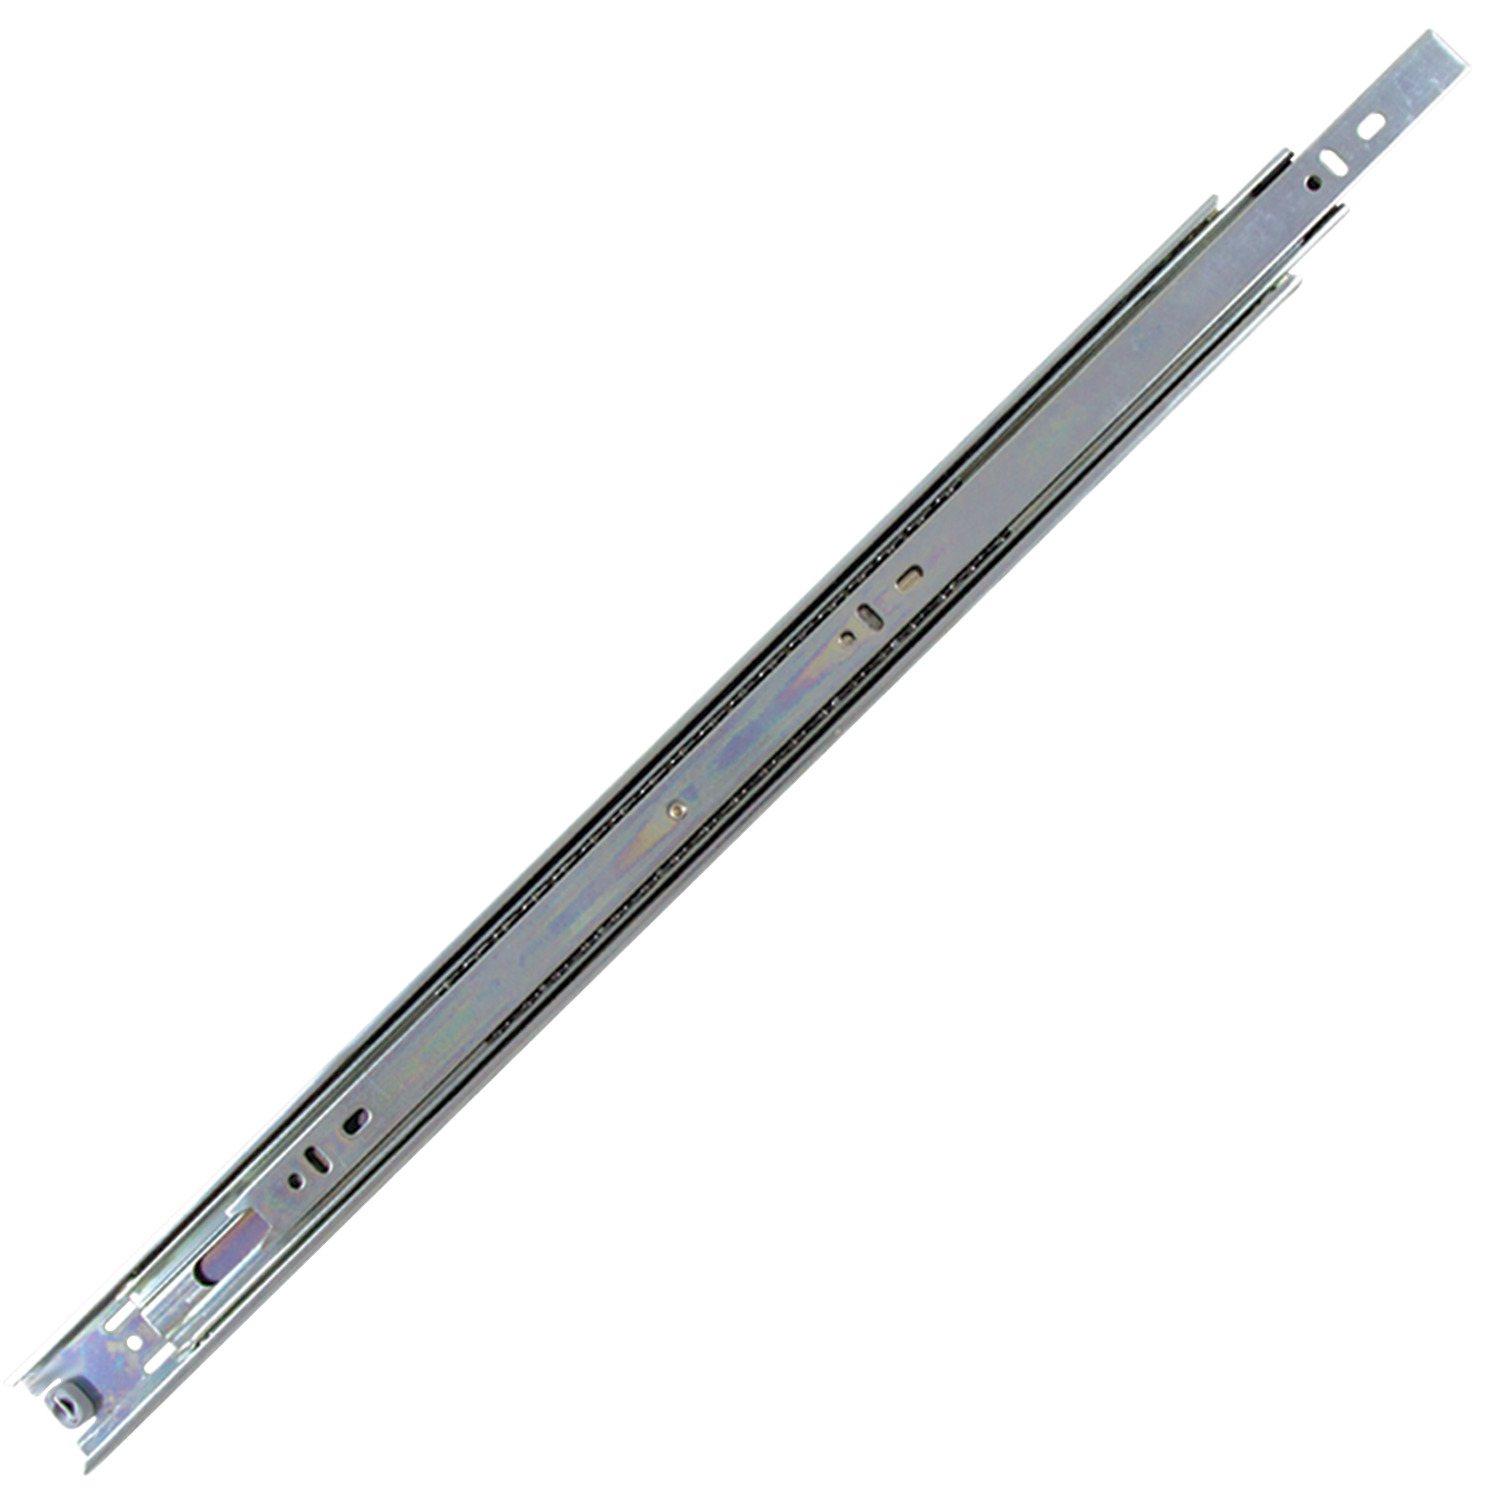 Drawer Slide - Full Extension Hold-in detent when slide closed. Positive stop. Rails can be disconnected via pressing disconnect lever. 30kg load per pair.